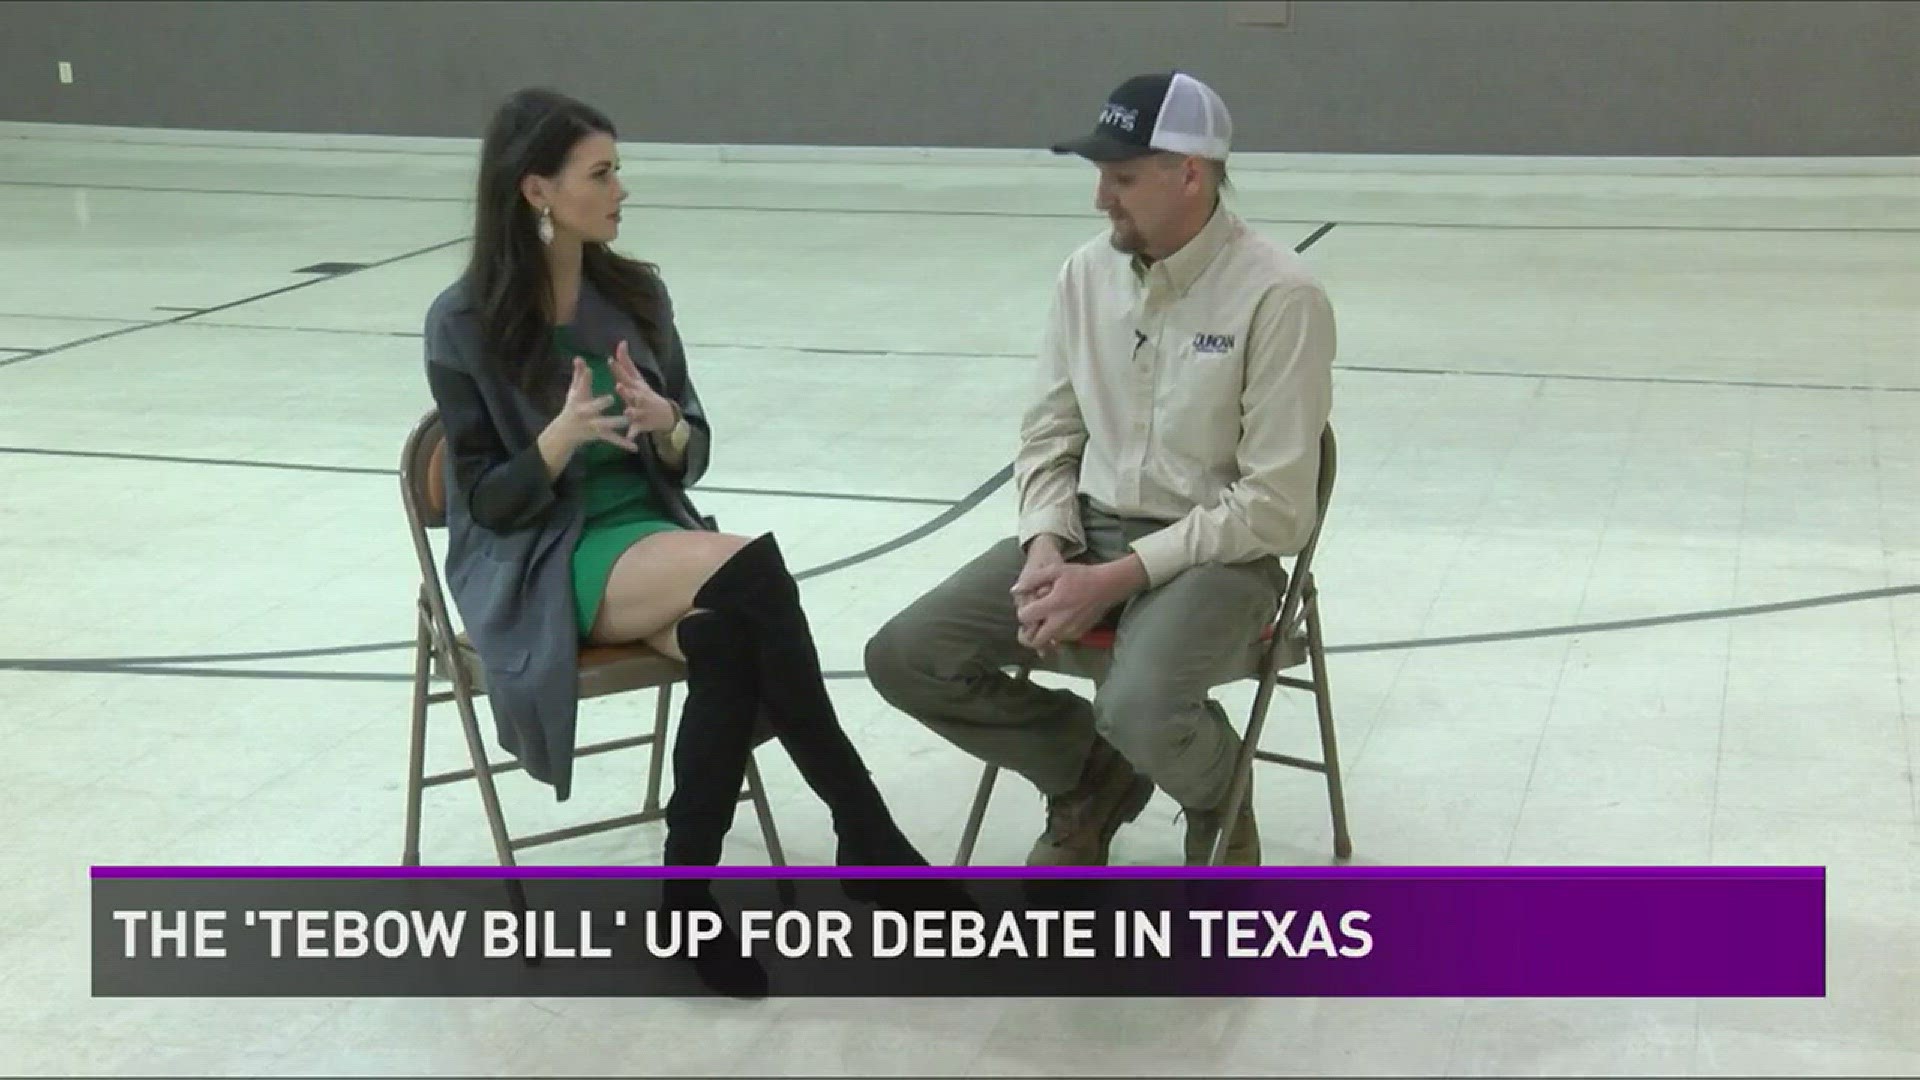 The 'Tebow Bill' Up For Debate in Texas